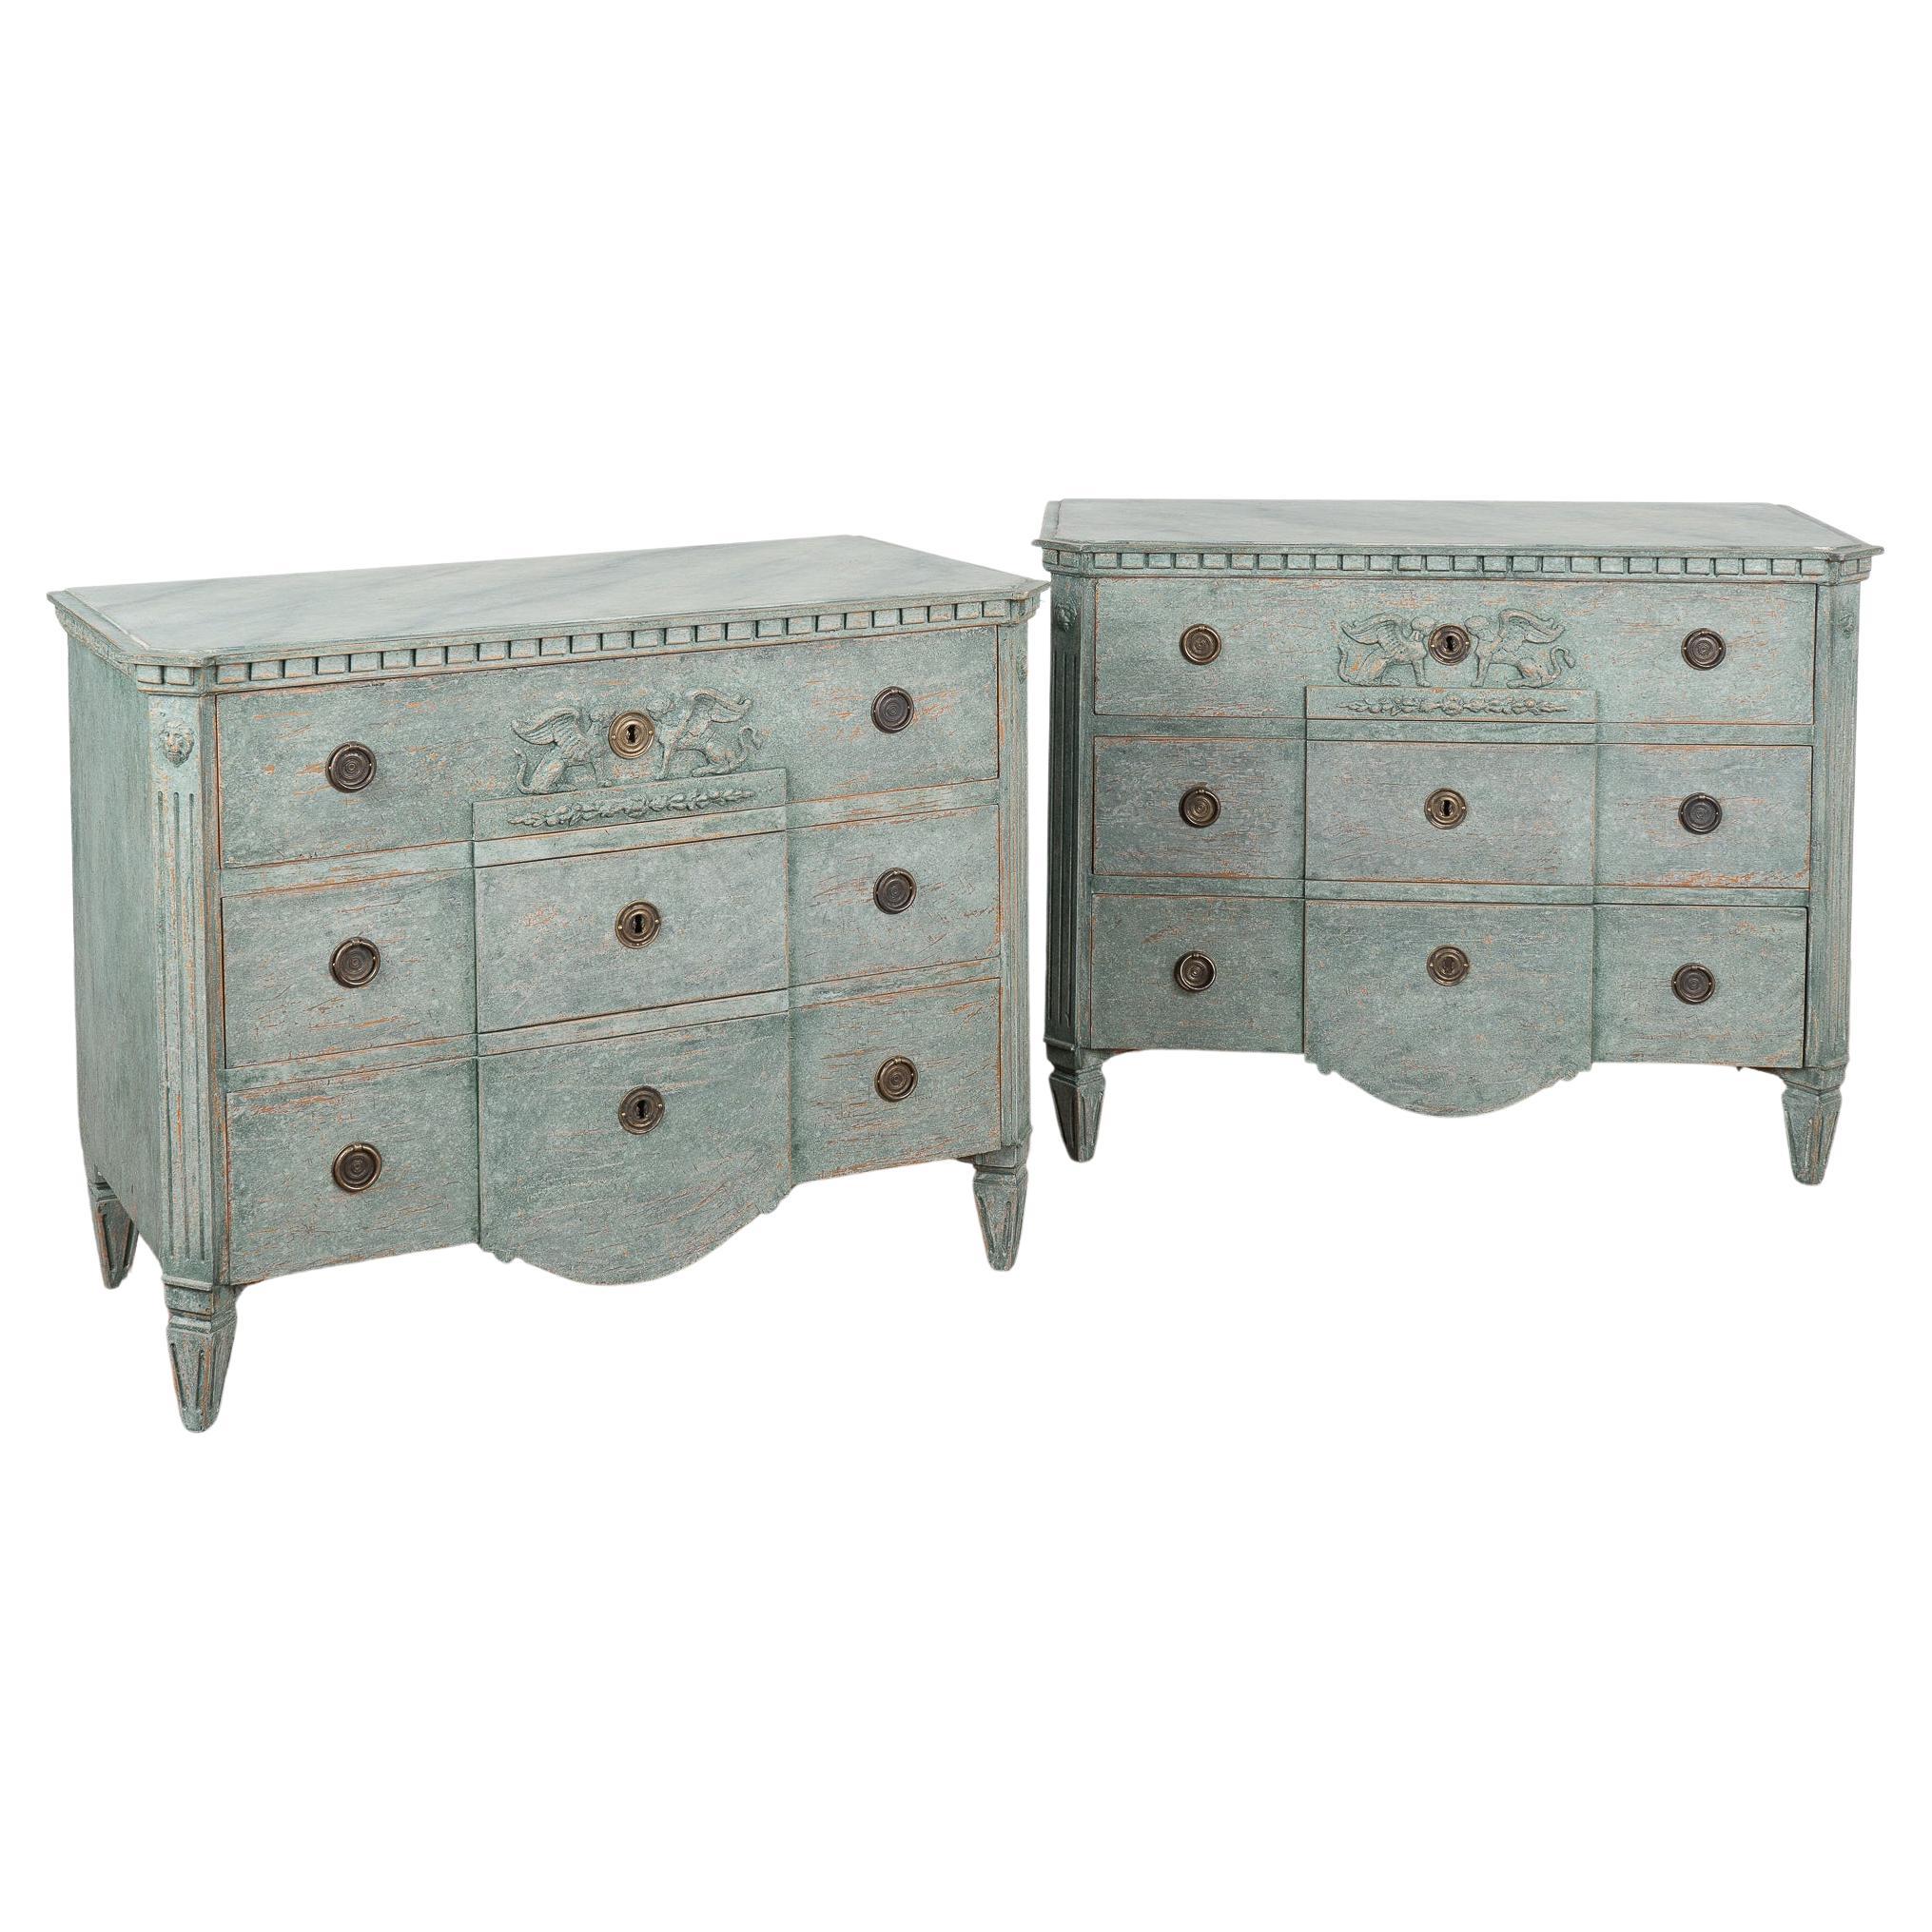 Pair, Painted Decorative Chest of Three Drawers, Sweden circa 1840-60